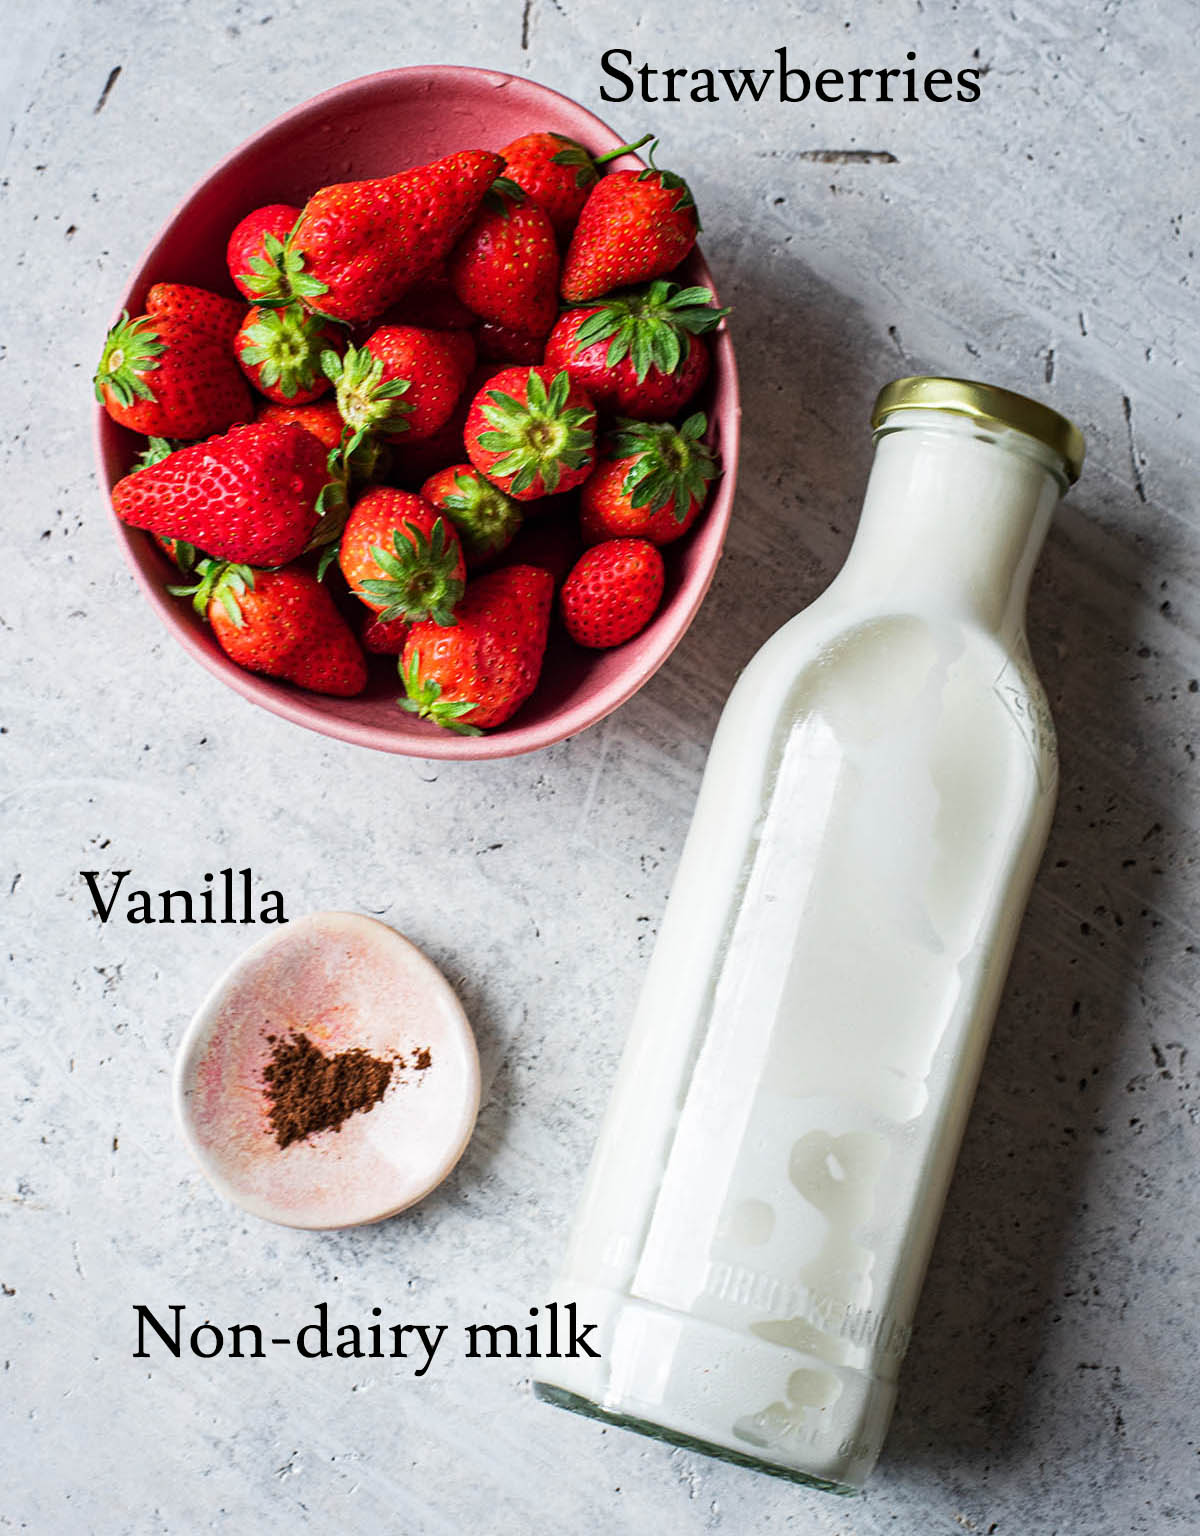 Strawberry milk ingredients with labels.